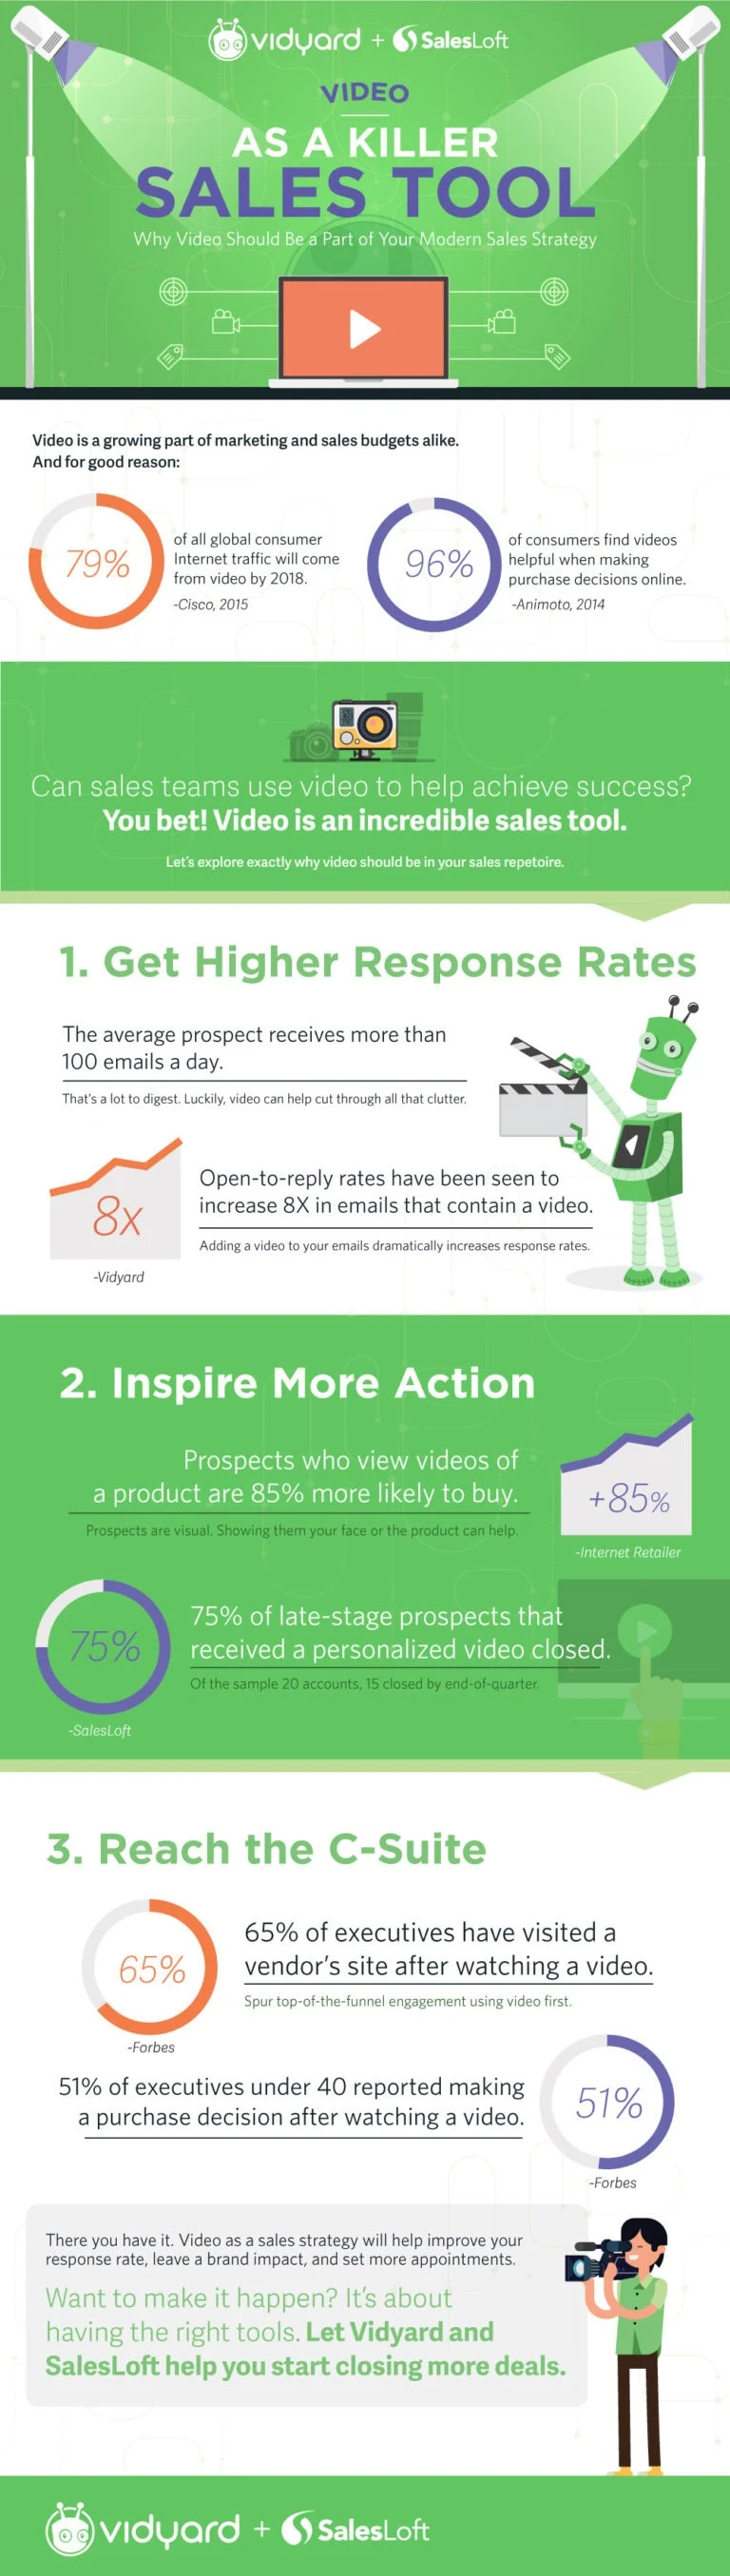 3 Reasons Video is a Phenomenal Sales Tool - #Infographic